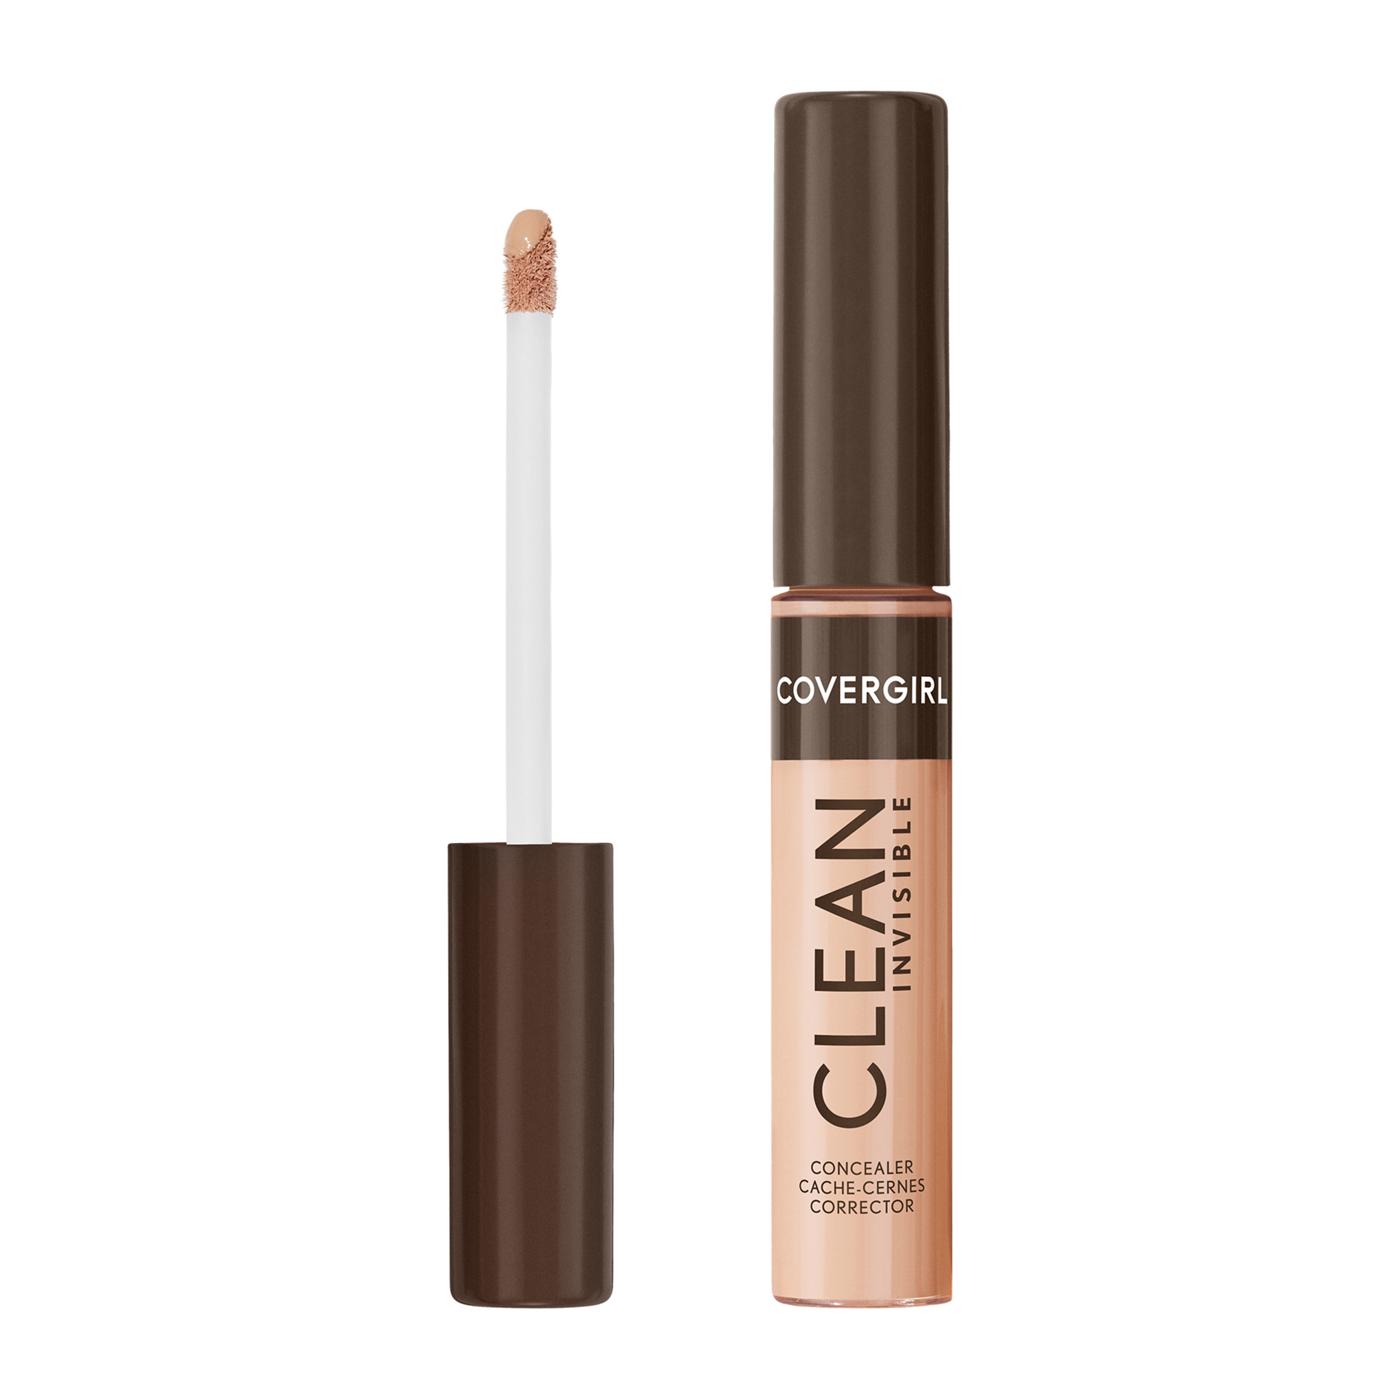 Covergirl Clean Invisible Concealer - Golden Ivory; image 5 of 14